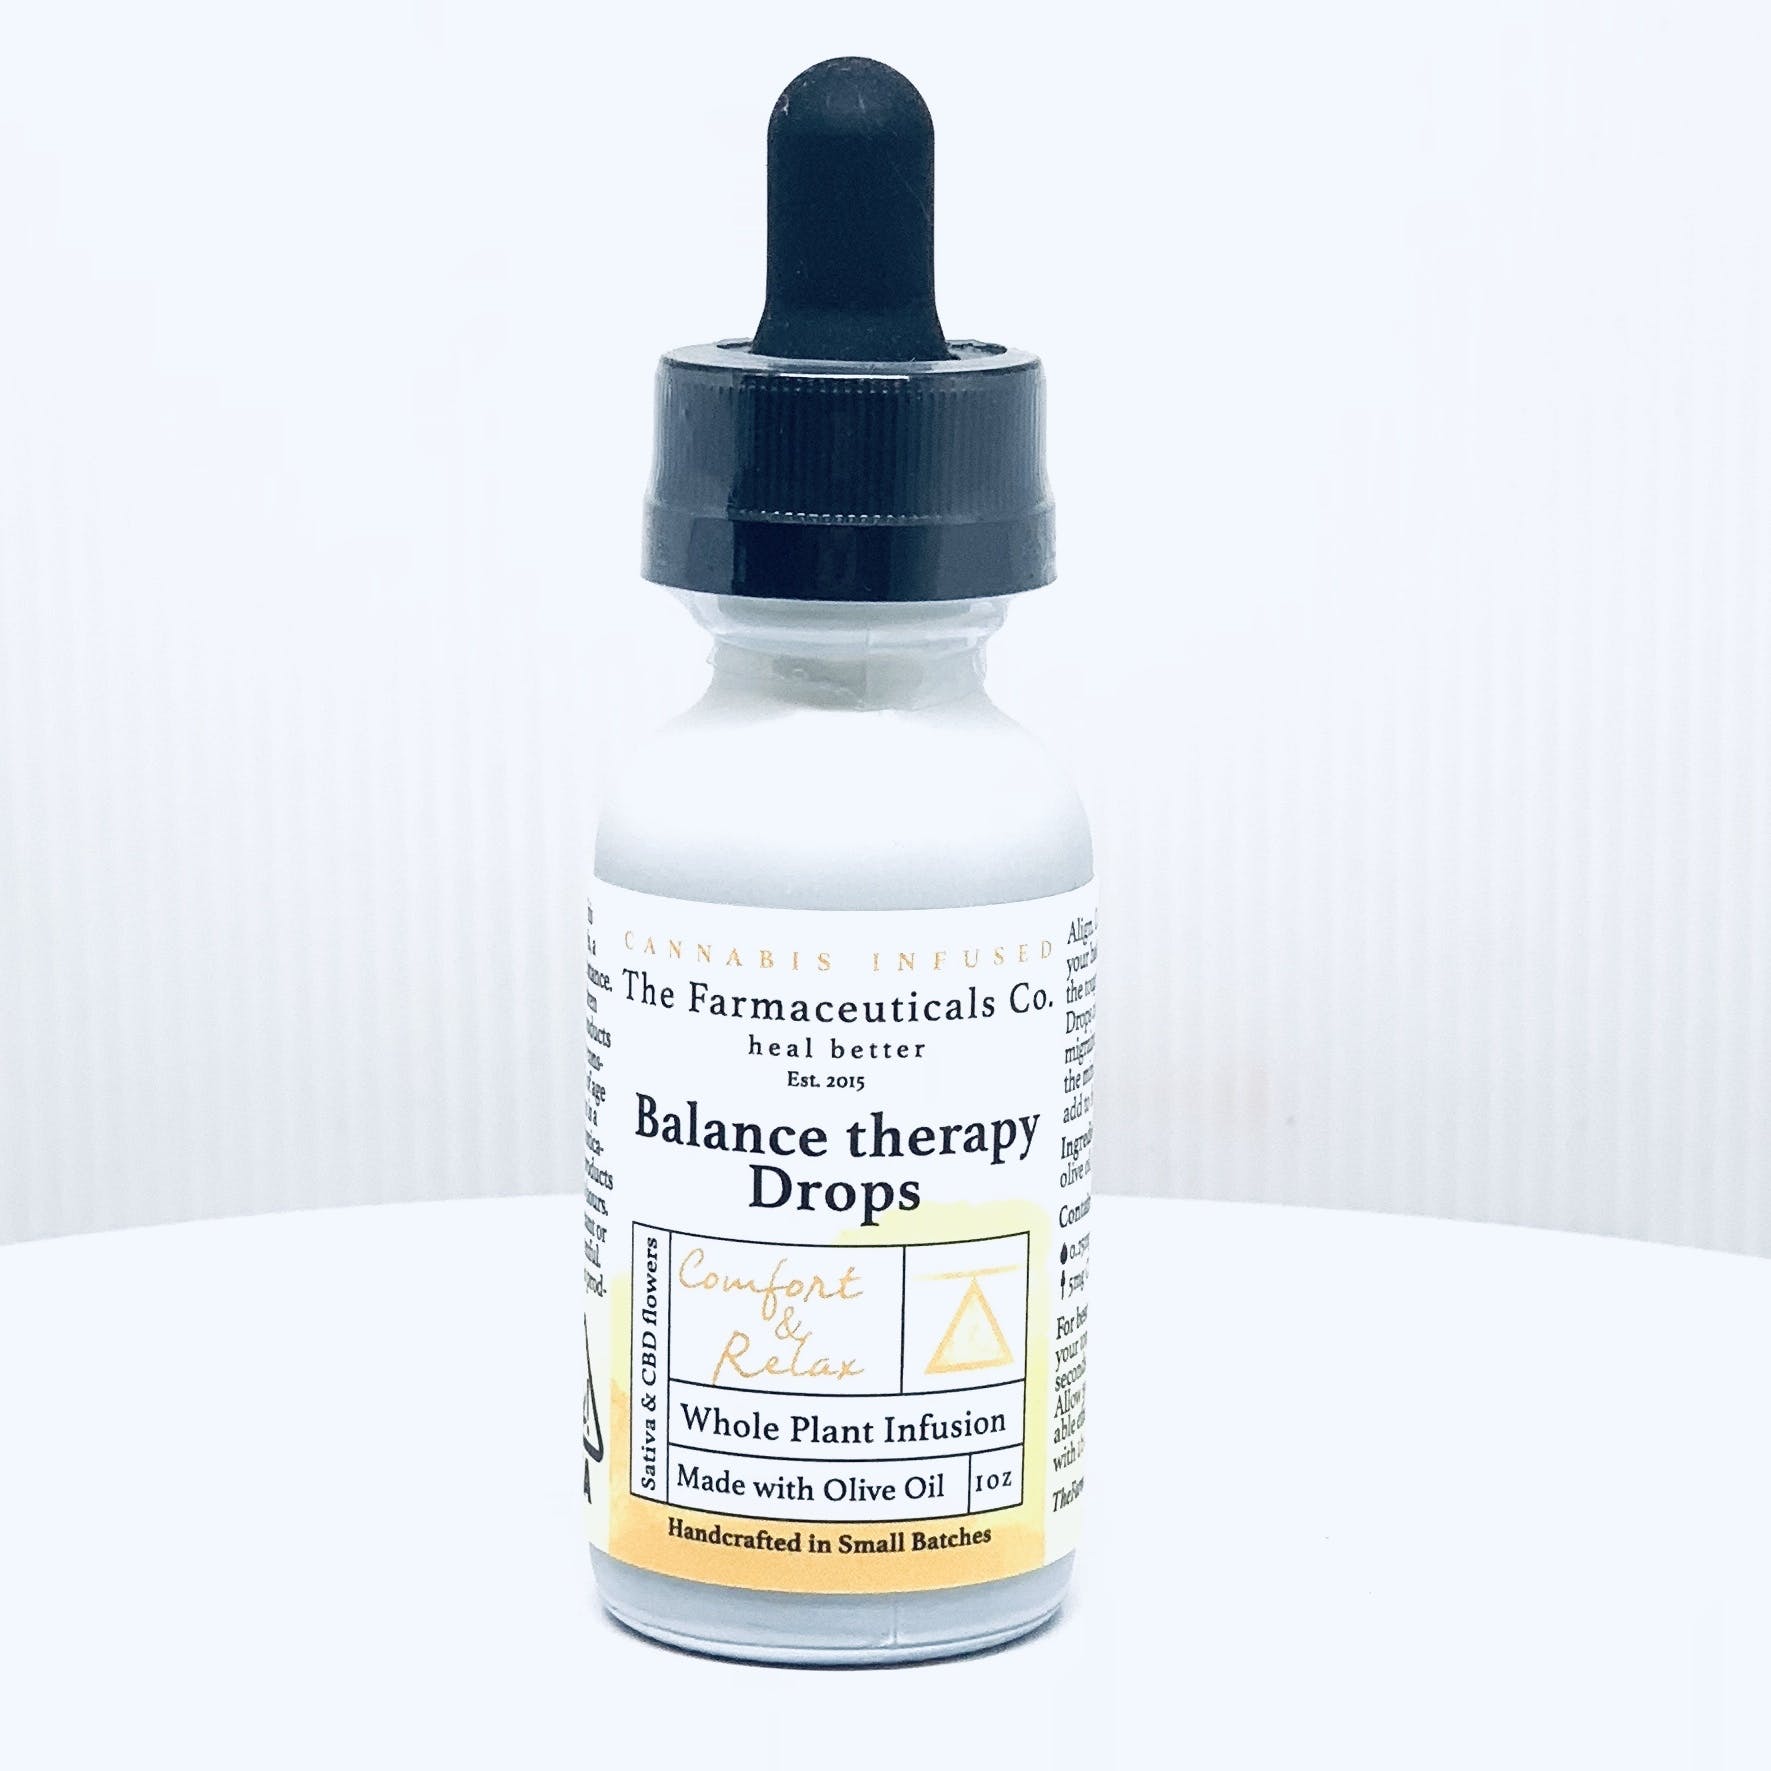 The Farmaceuticals Co. | Balance Therapy 1:1